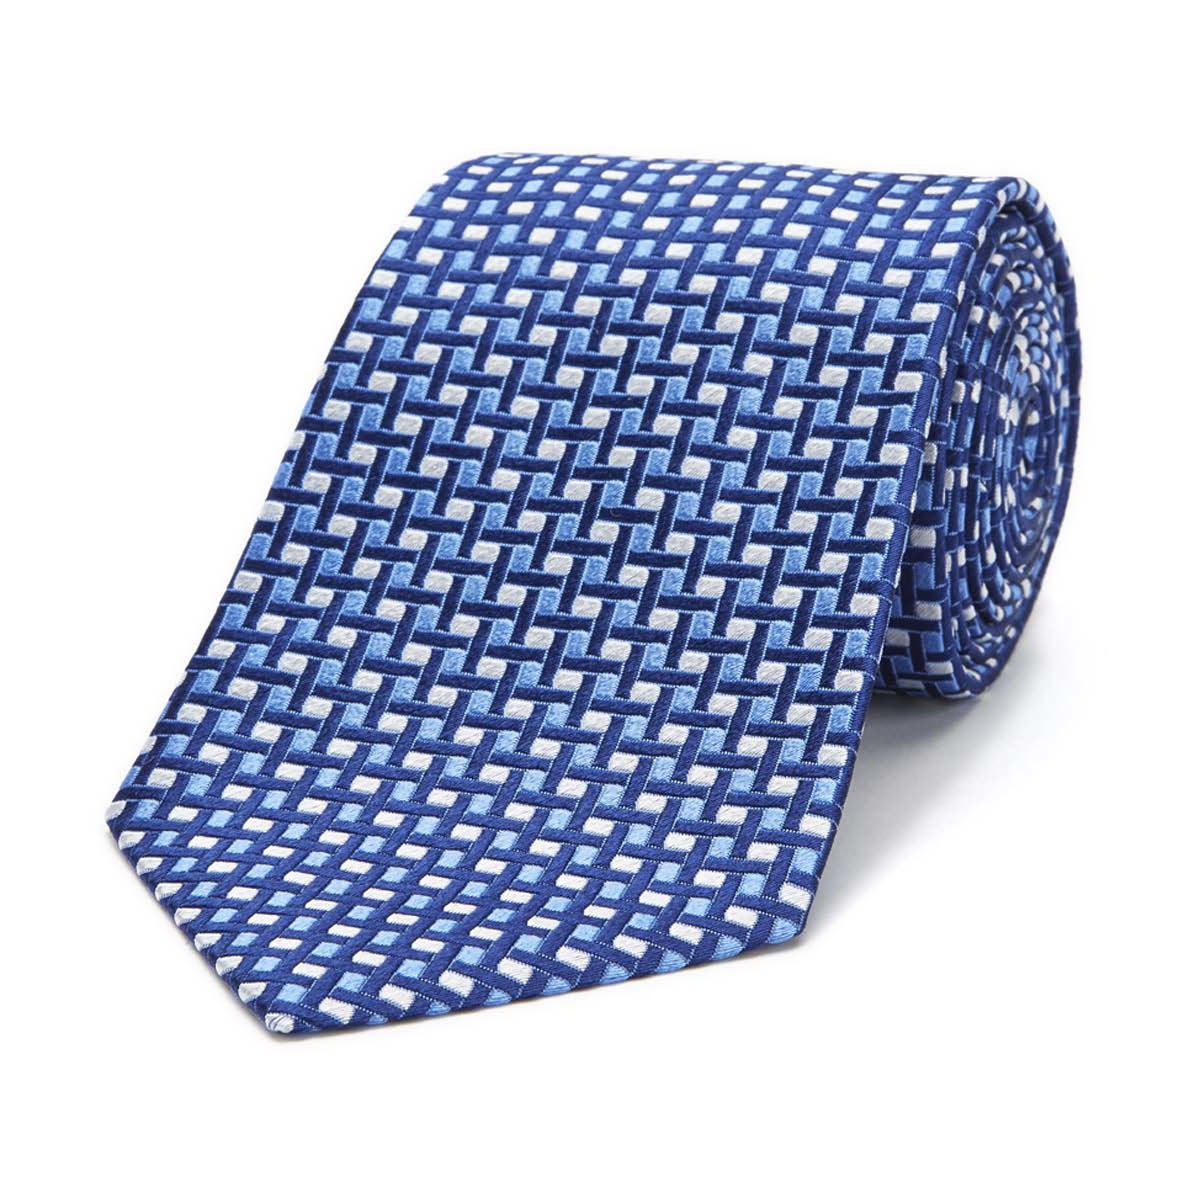 Turnbull & asser Criss Cross Squares Tie In Navy, Blue And White in ...